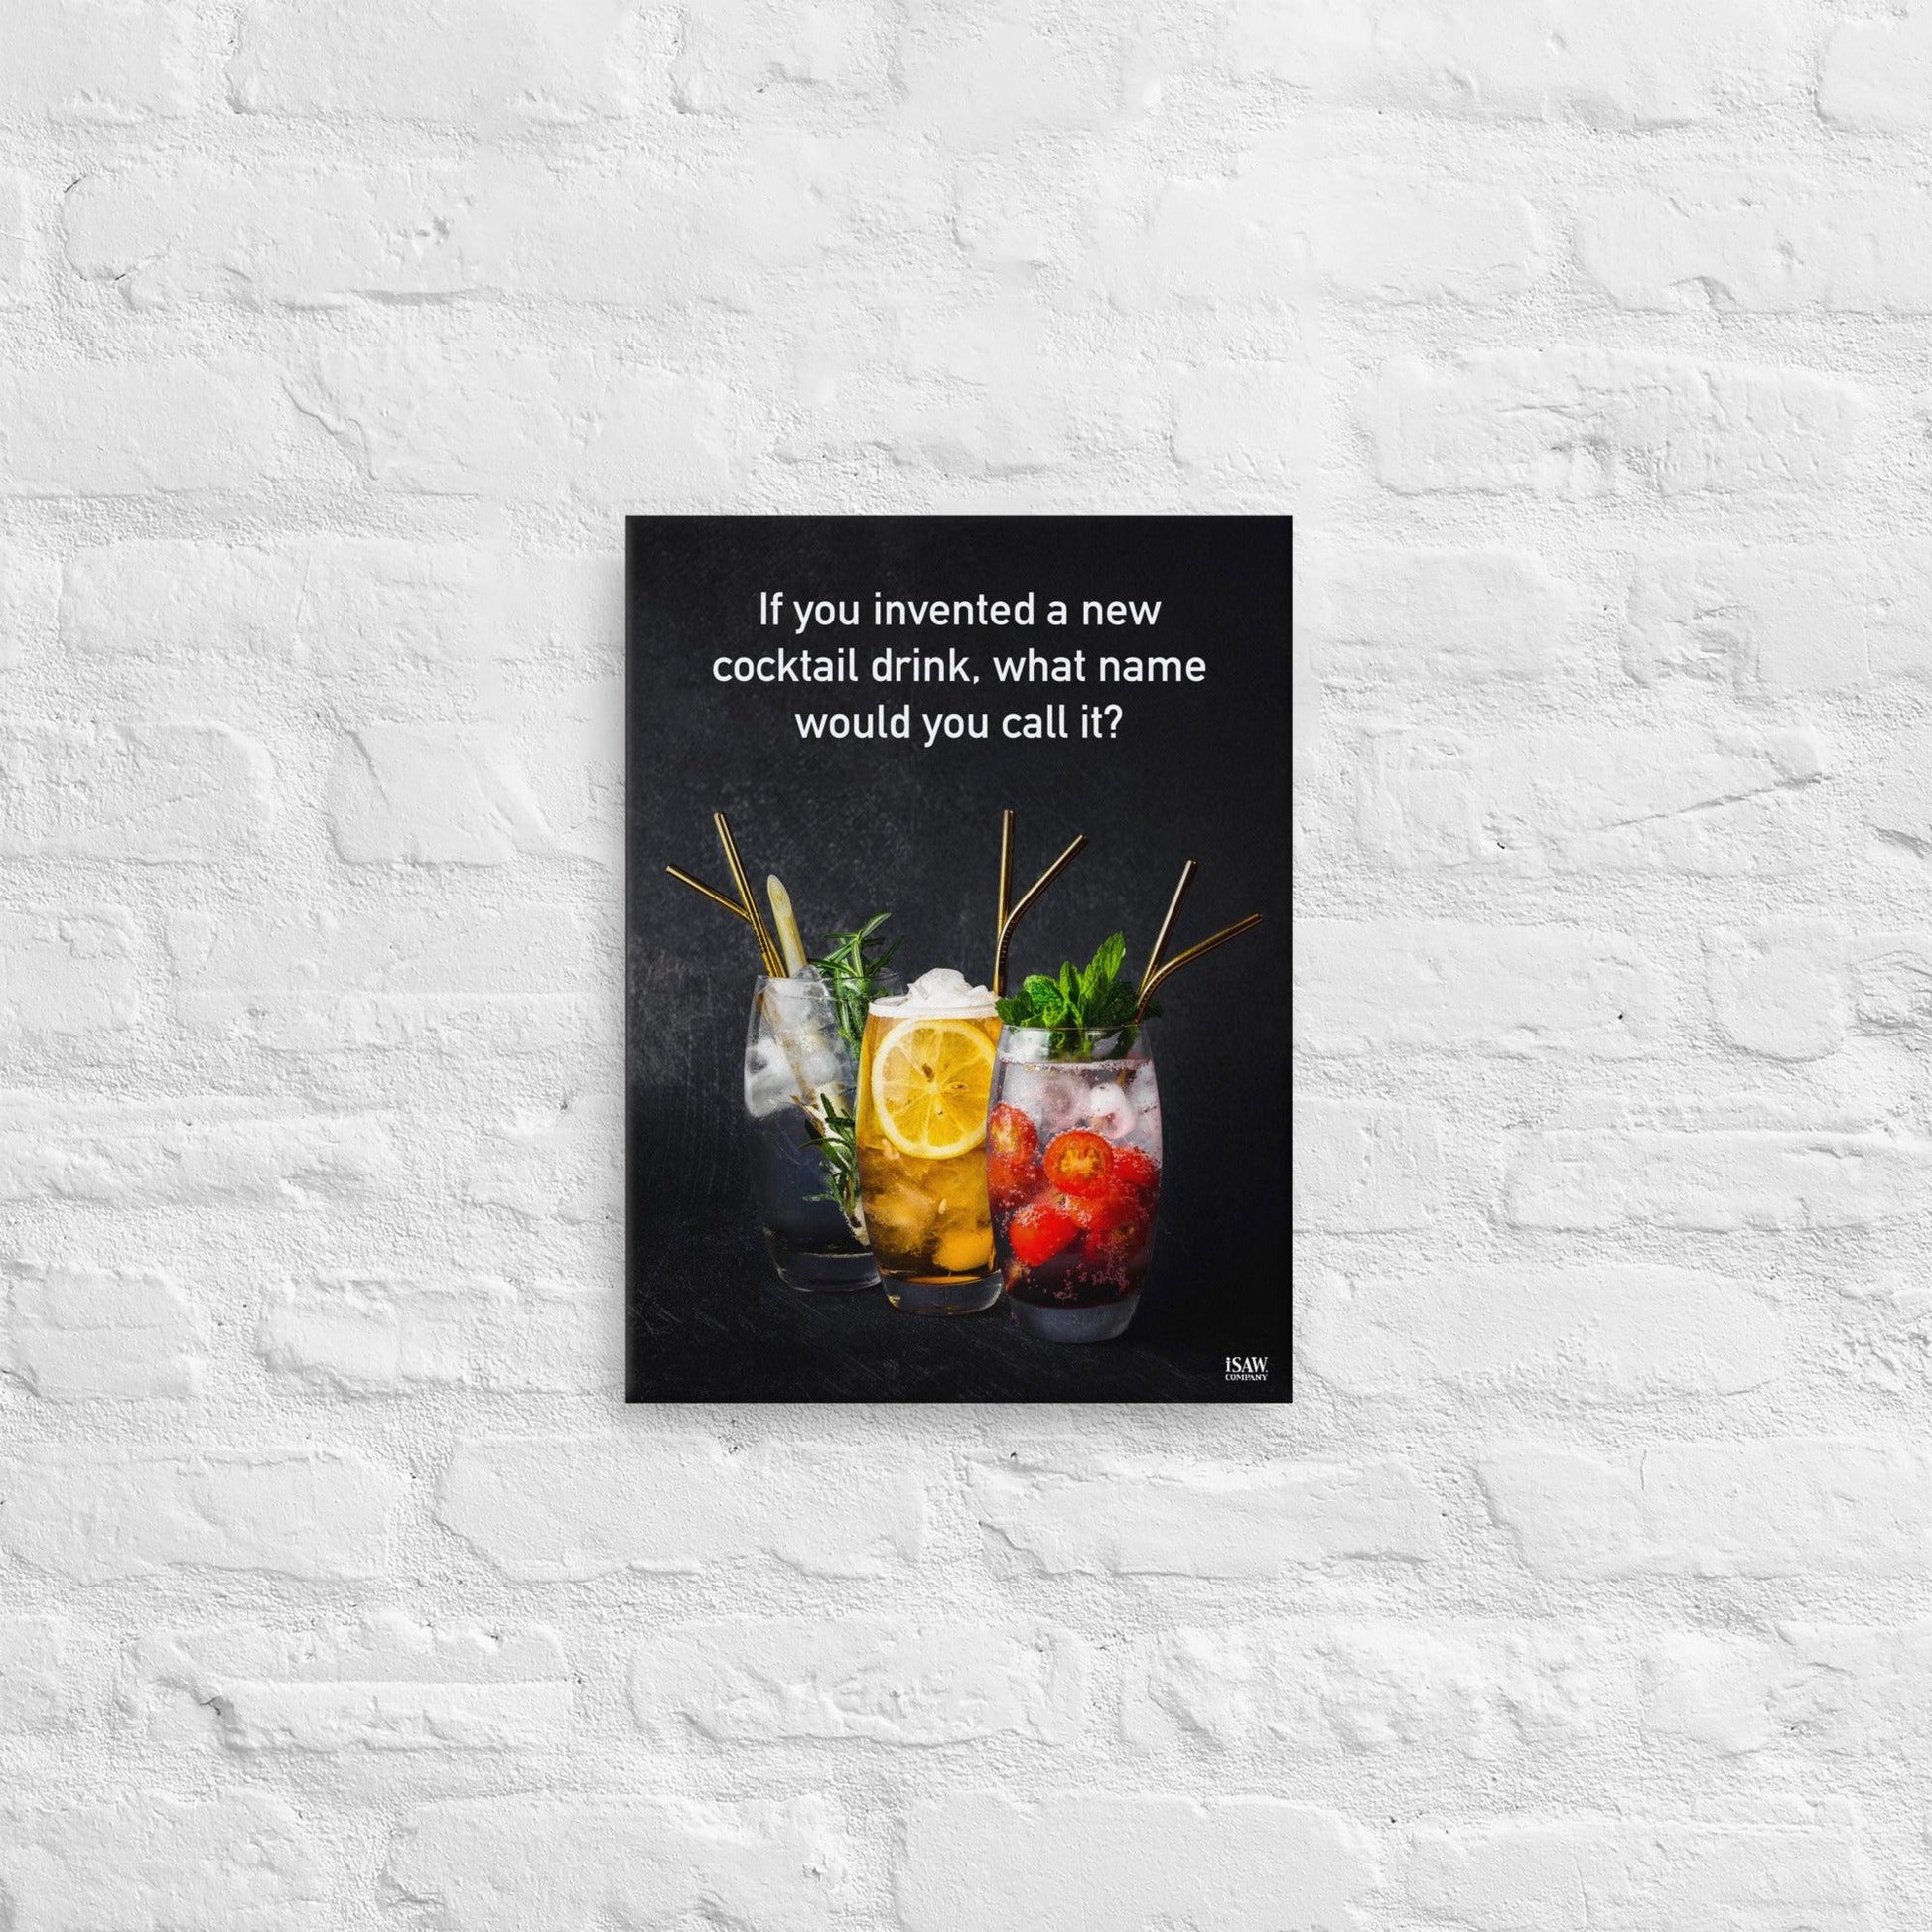 If You Invented A New Cocktail Drink - Canvas Print - iSAW Company